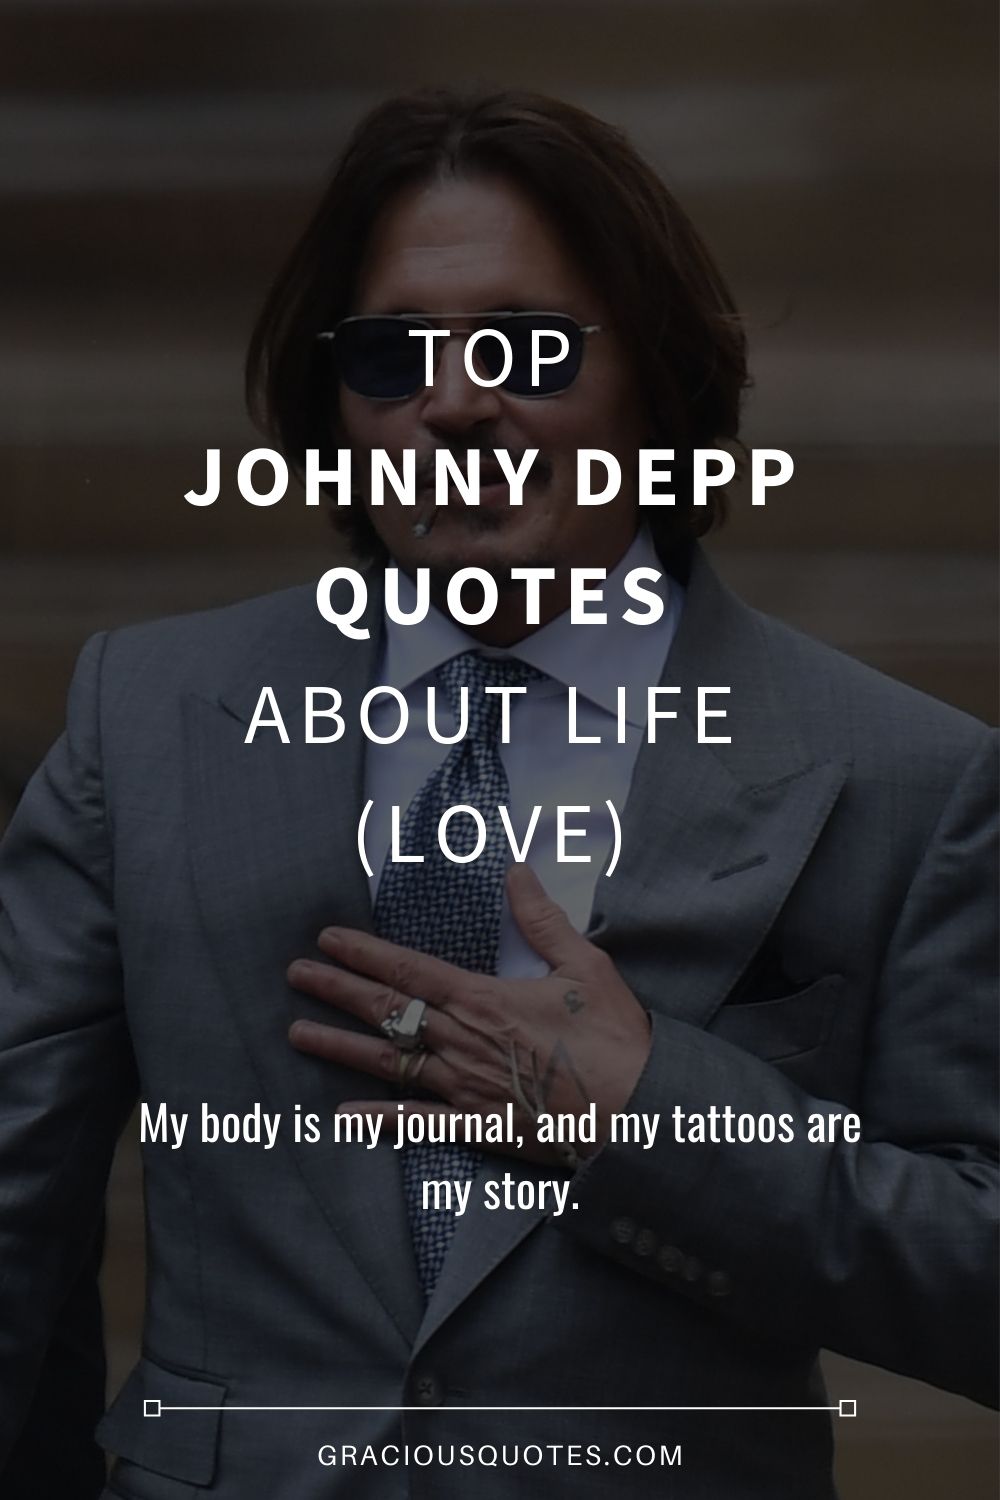 Top Johnny Depp Quotes About Life (LOVE) - Gracious Quotes